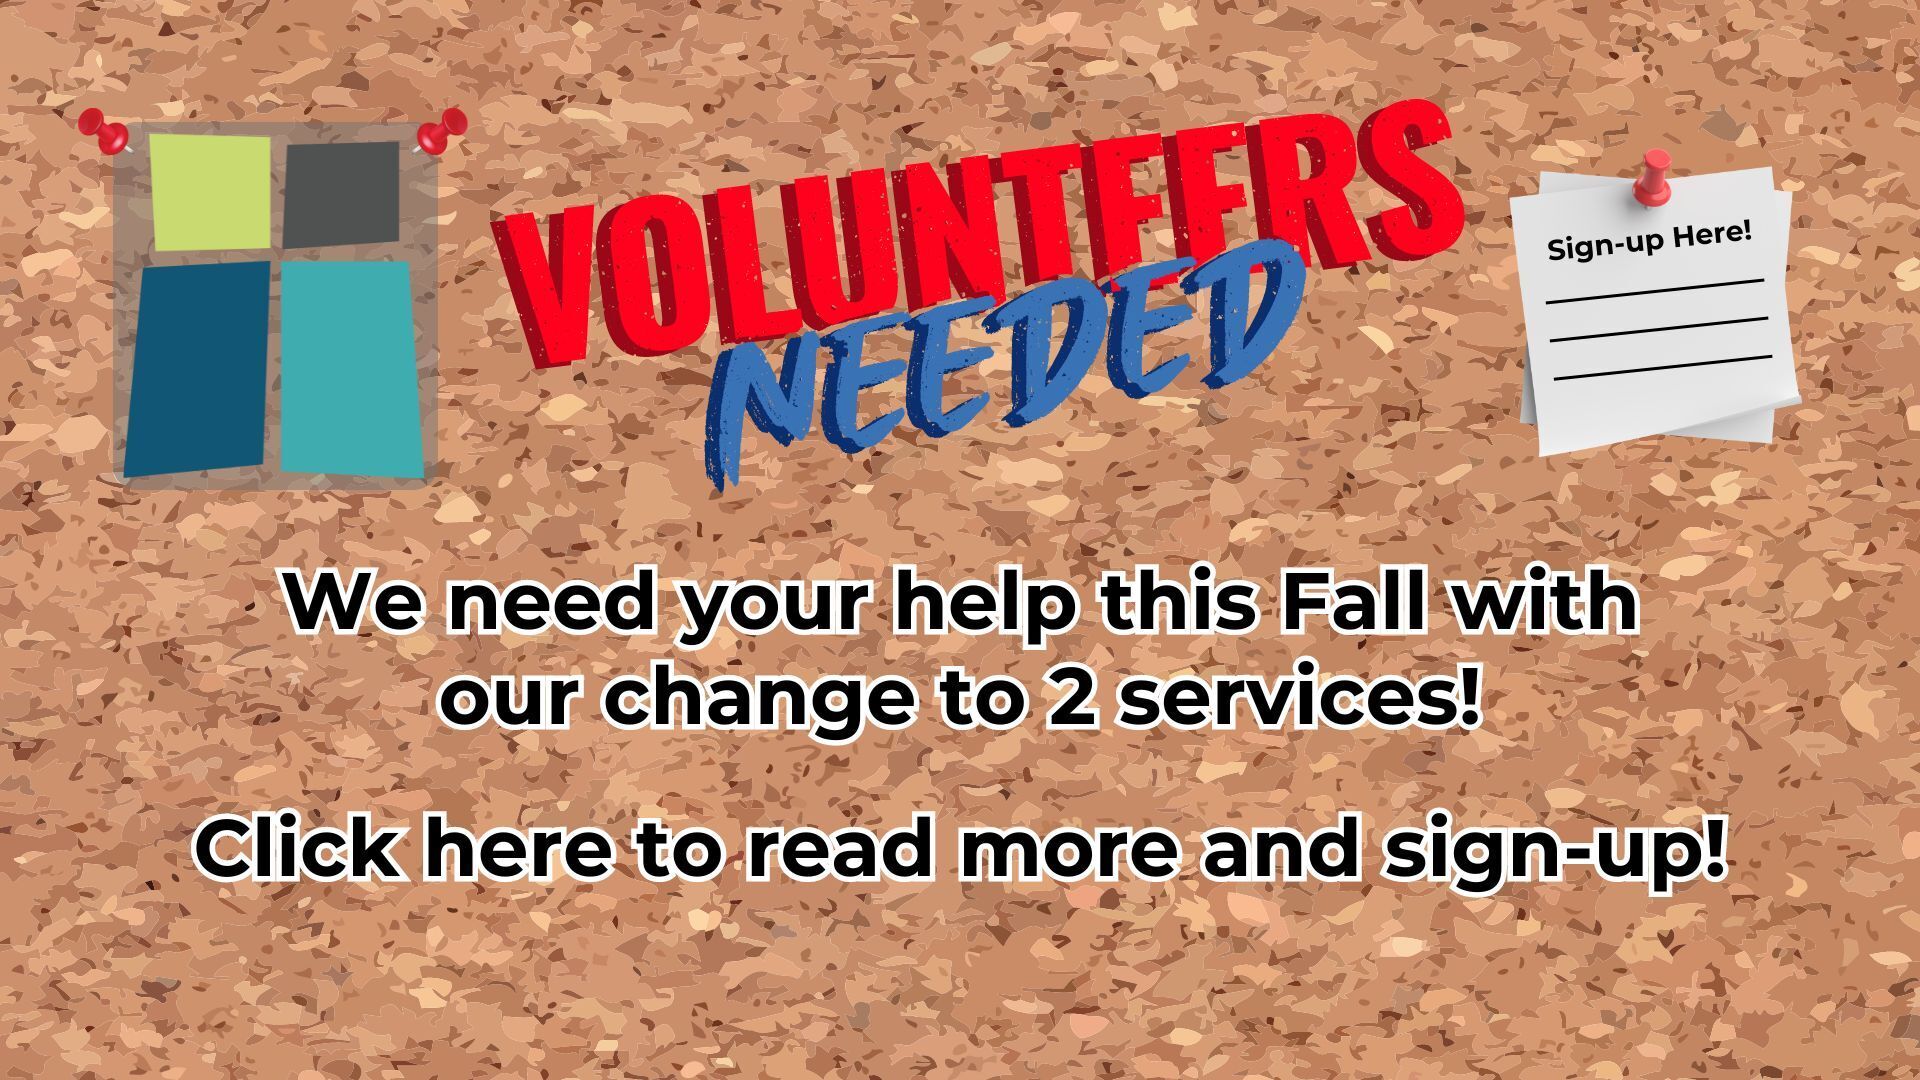 Volunteers Needed for 2-Services this Fall